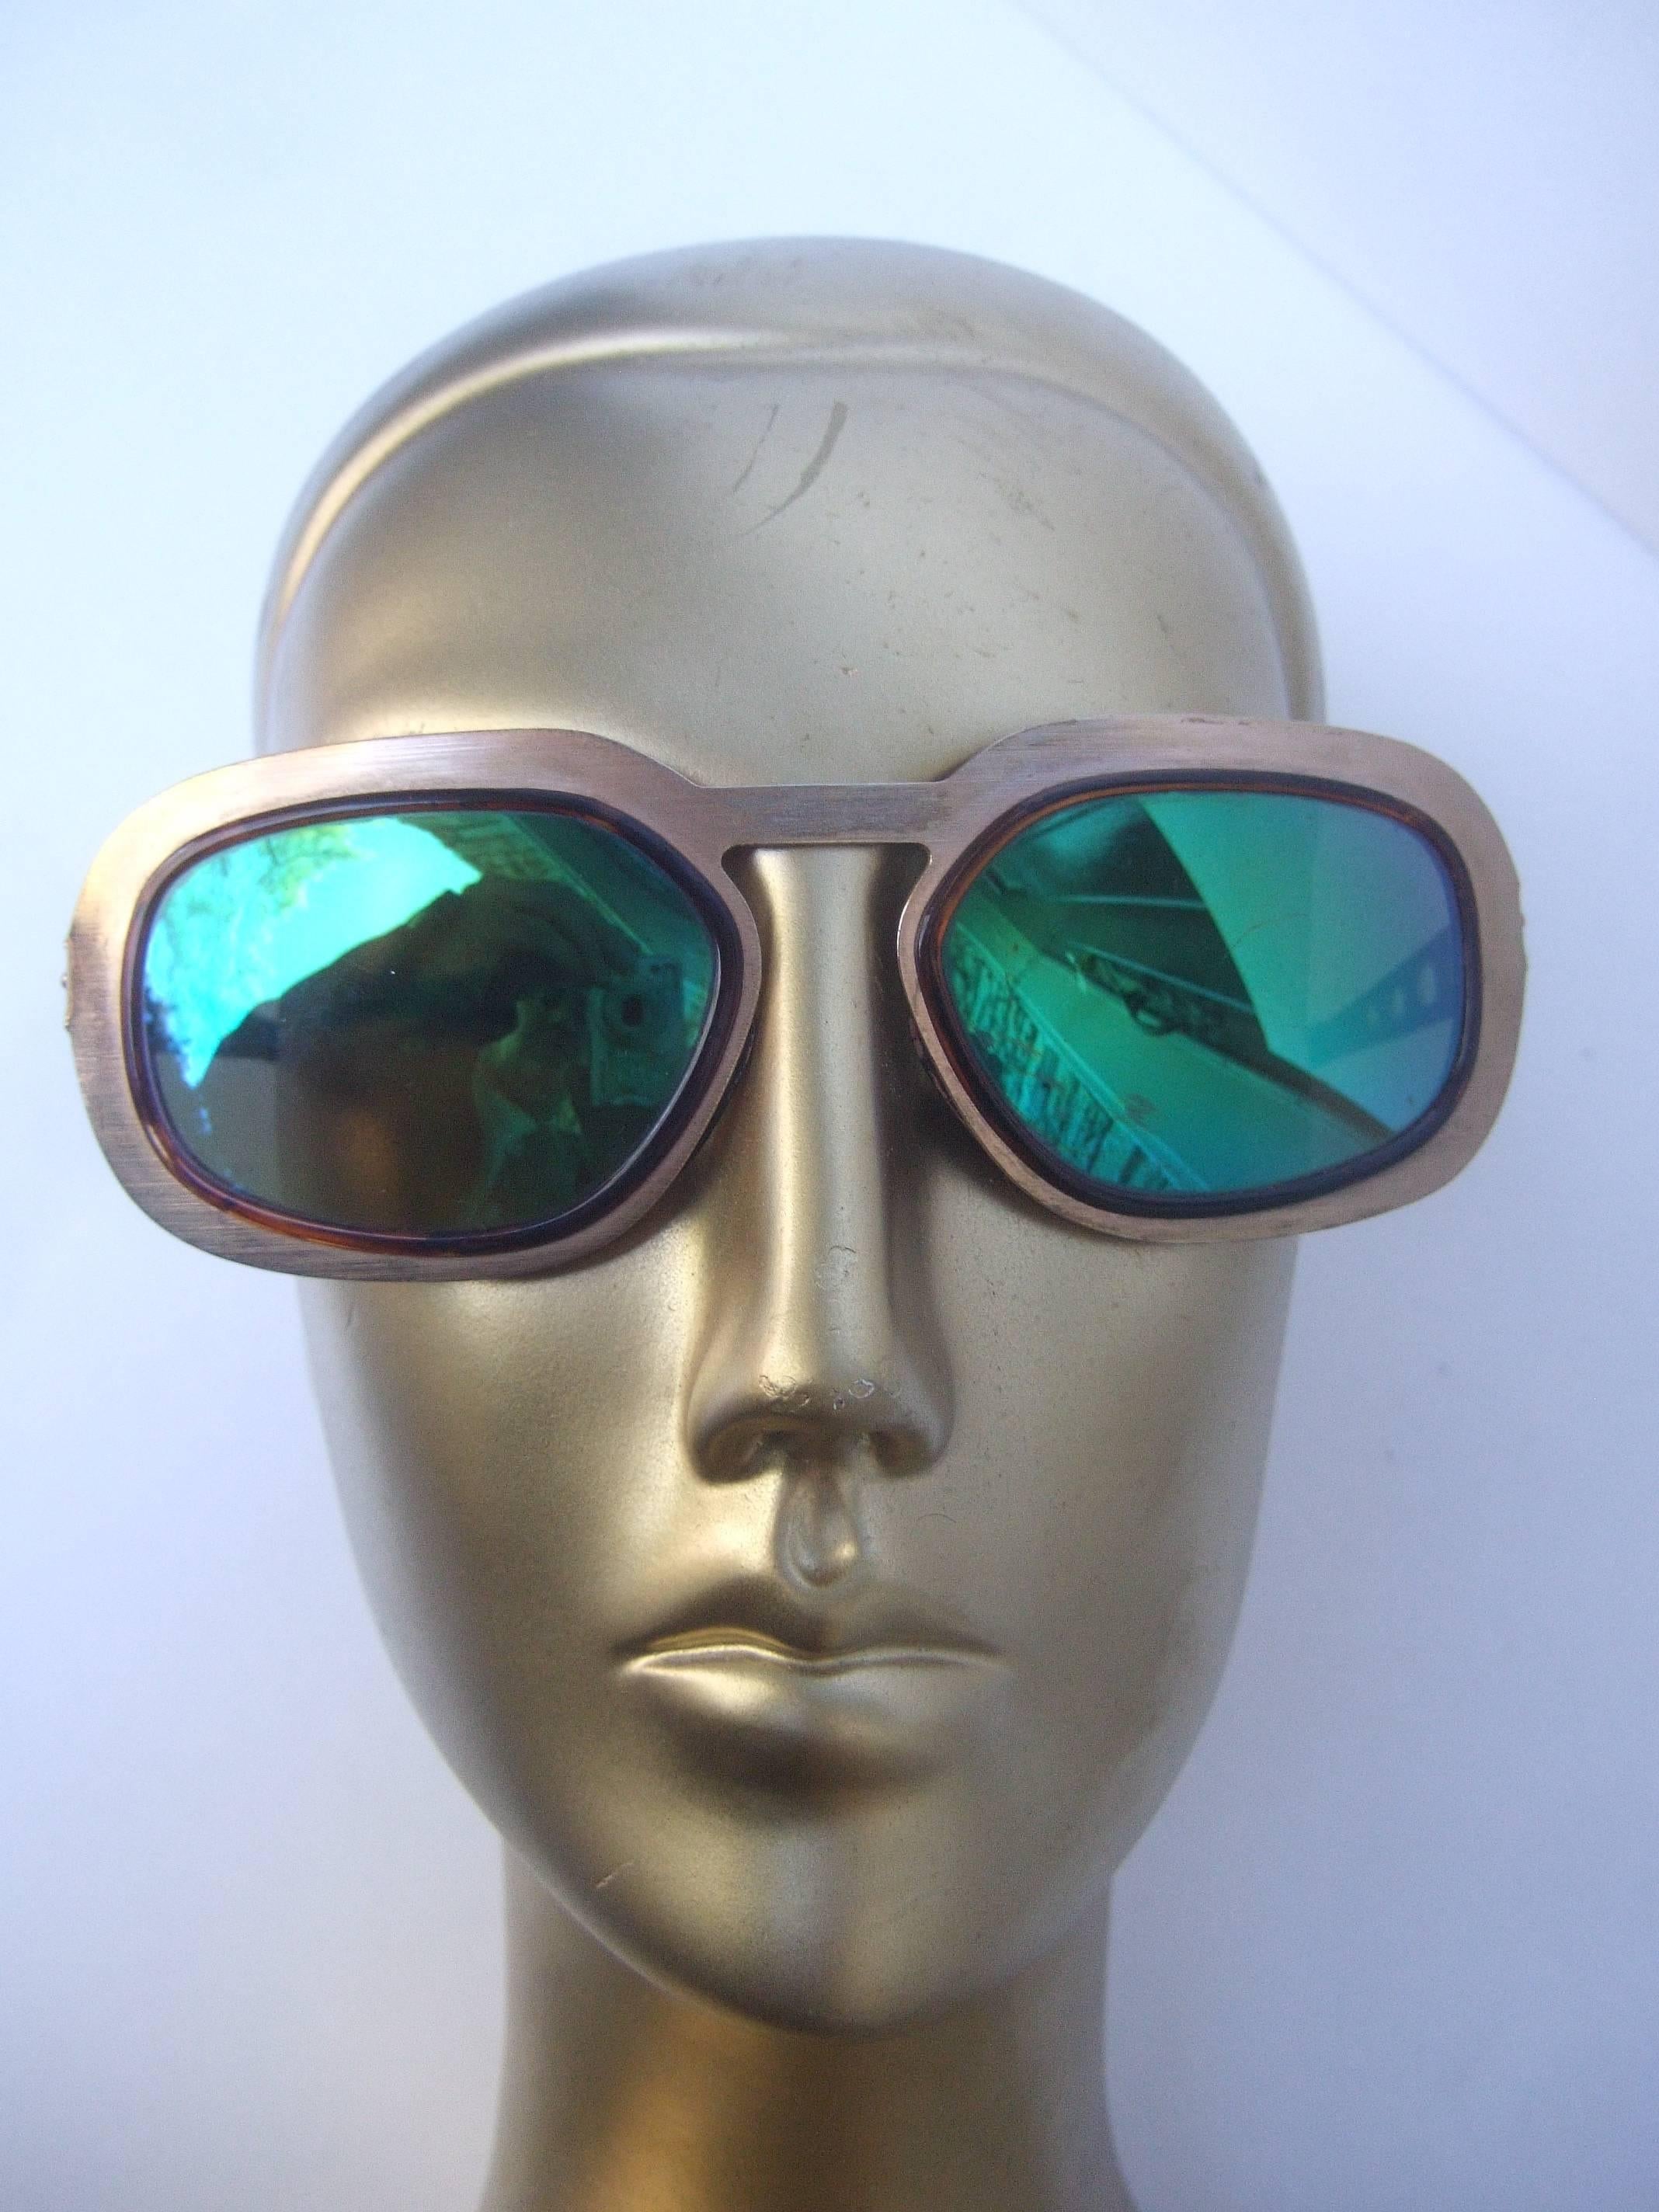 Sleek gilt metal green tinted sunglasses Made in Italy 1970s 
The mod retro sunglasses are designed with brushed
gilt metal frames. The plastic lenses have a green 
reflective tinted coating 

The sides of the frames are accented with oval